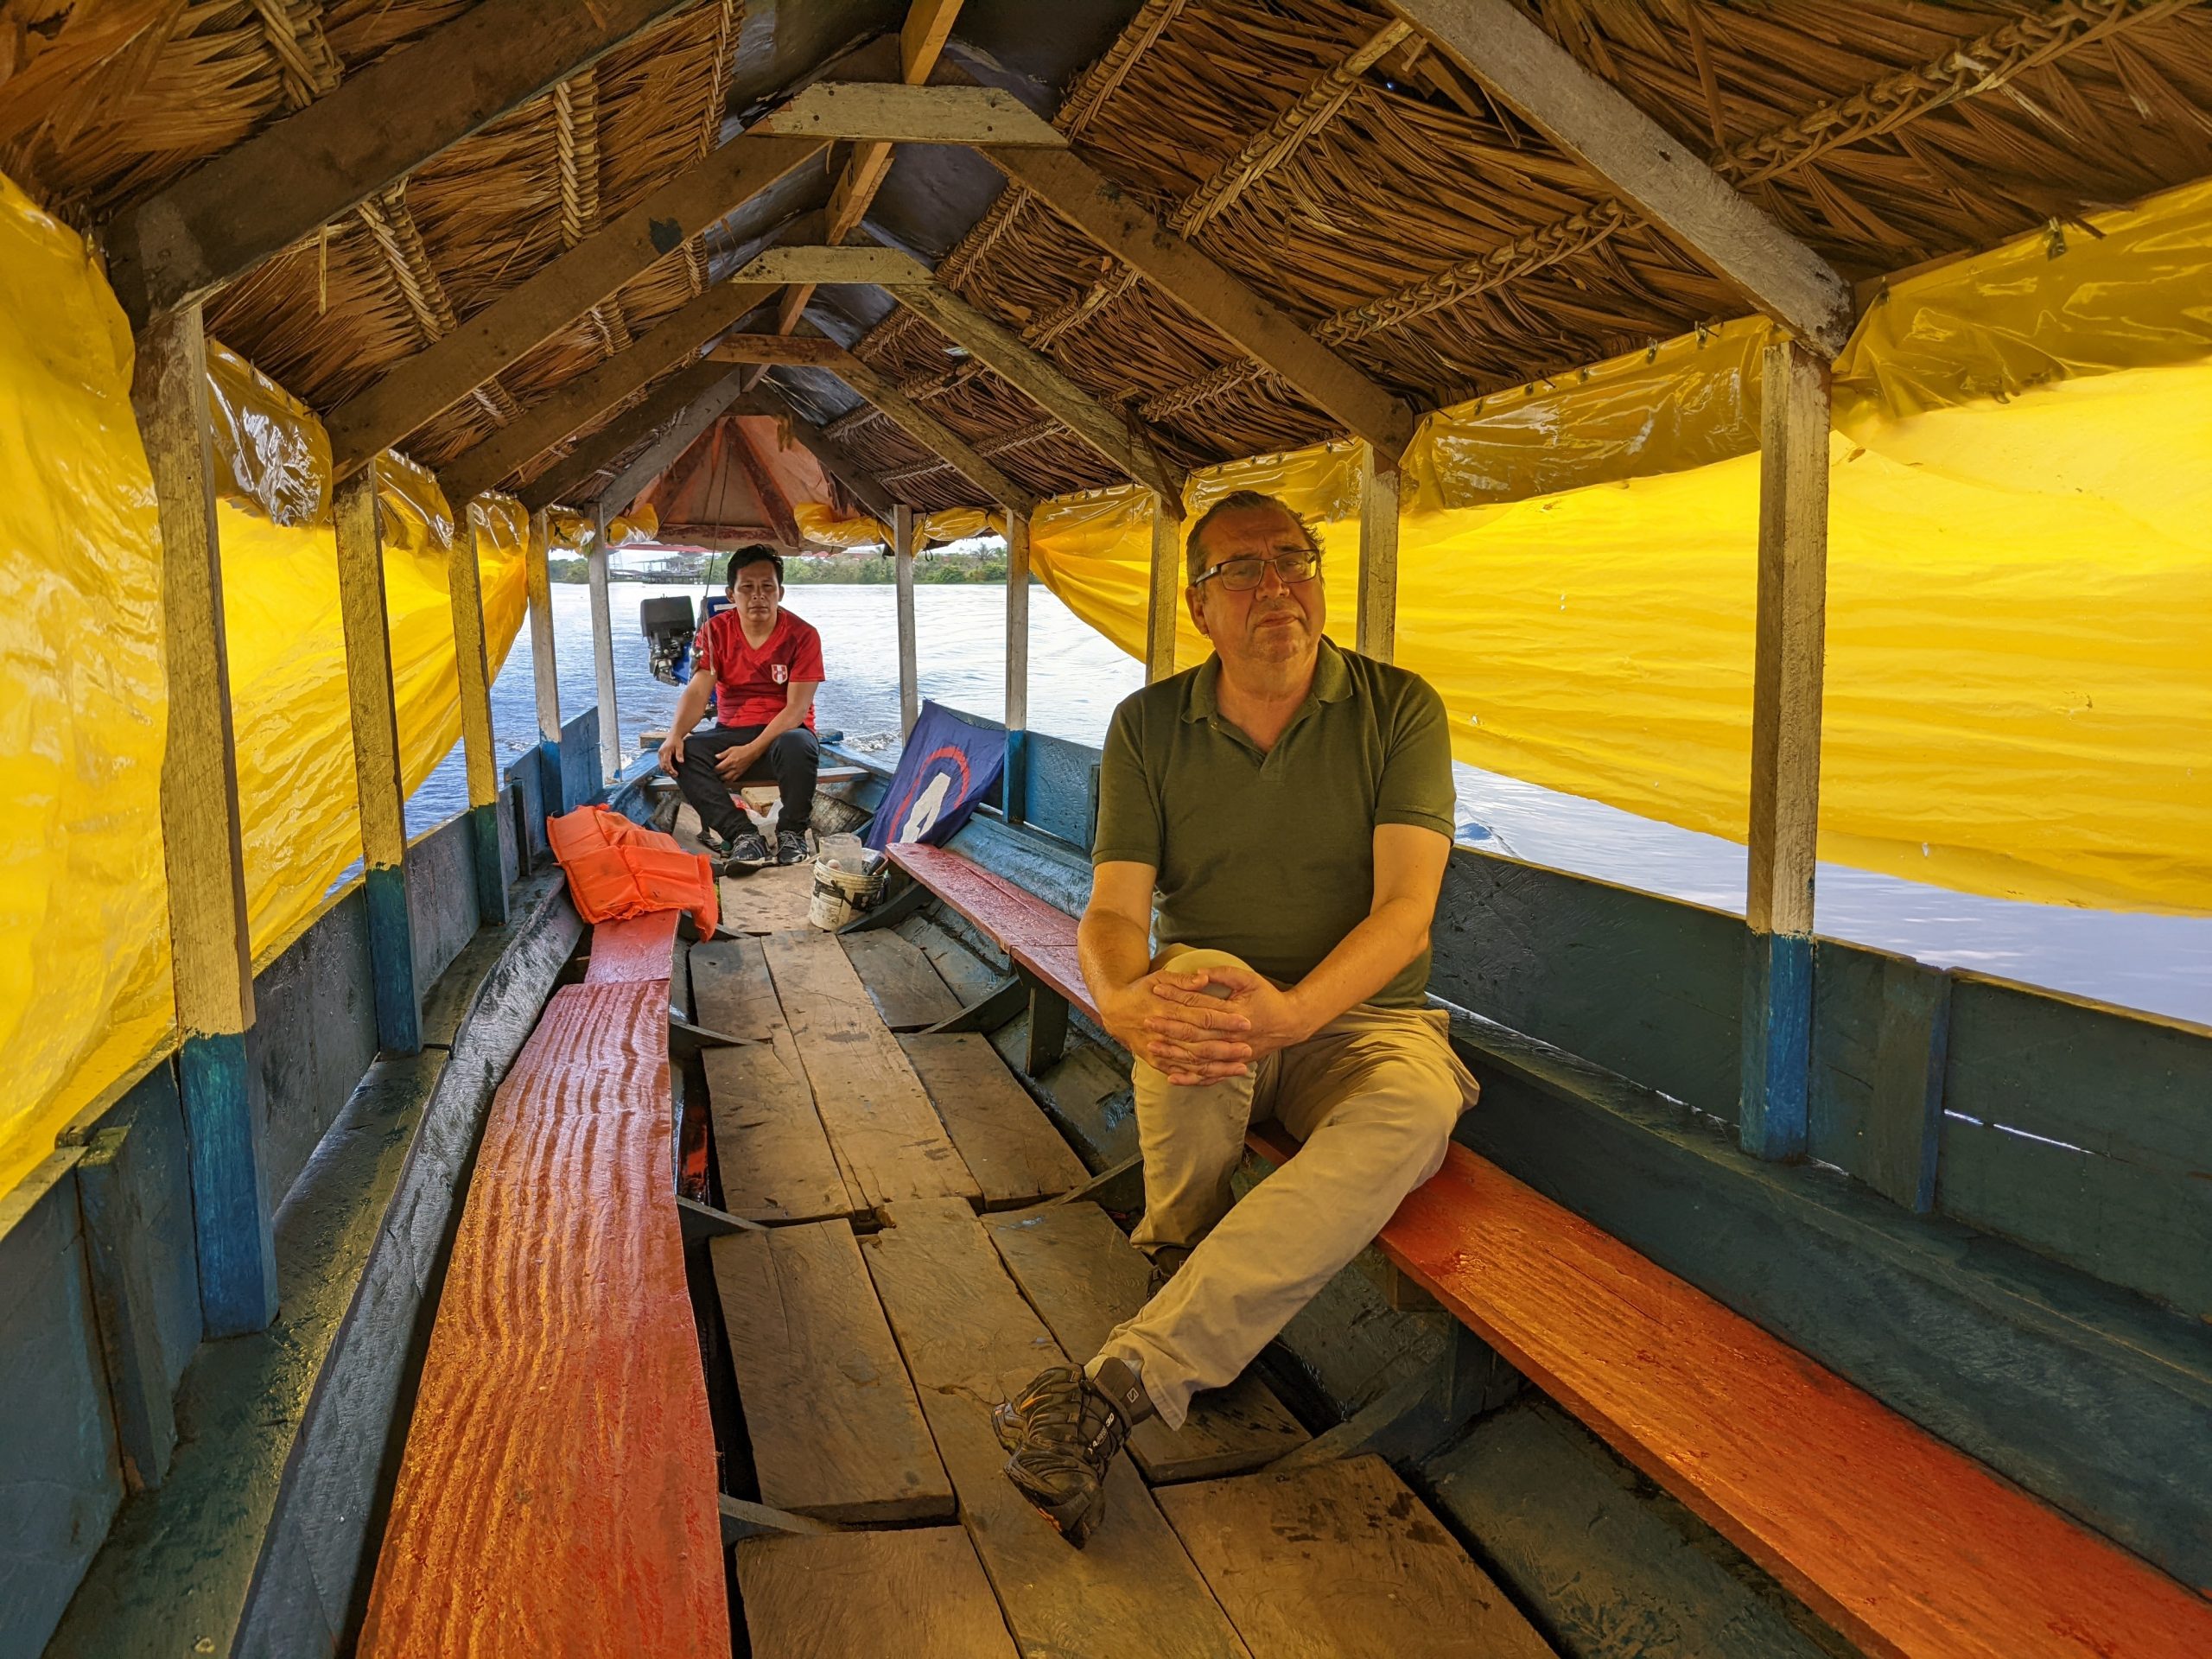 The interior of long, narrow boat with two passengers: Oyuela-Caycedo and a driver. It has two benches on each side, yellow tarp walls, and a wooden roof.